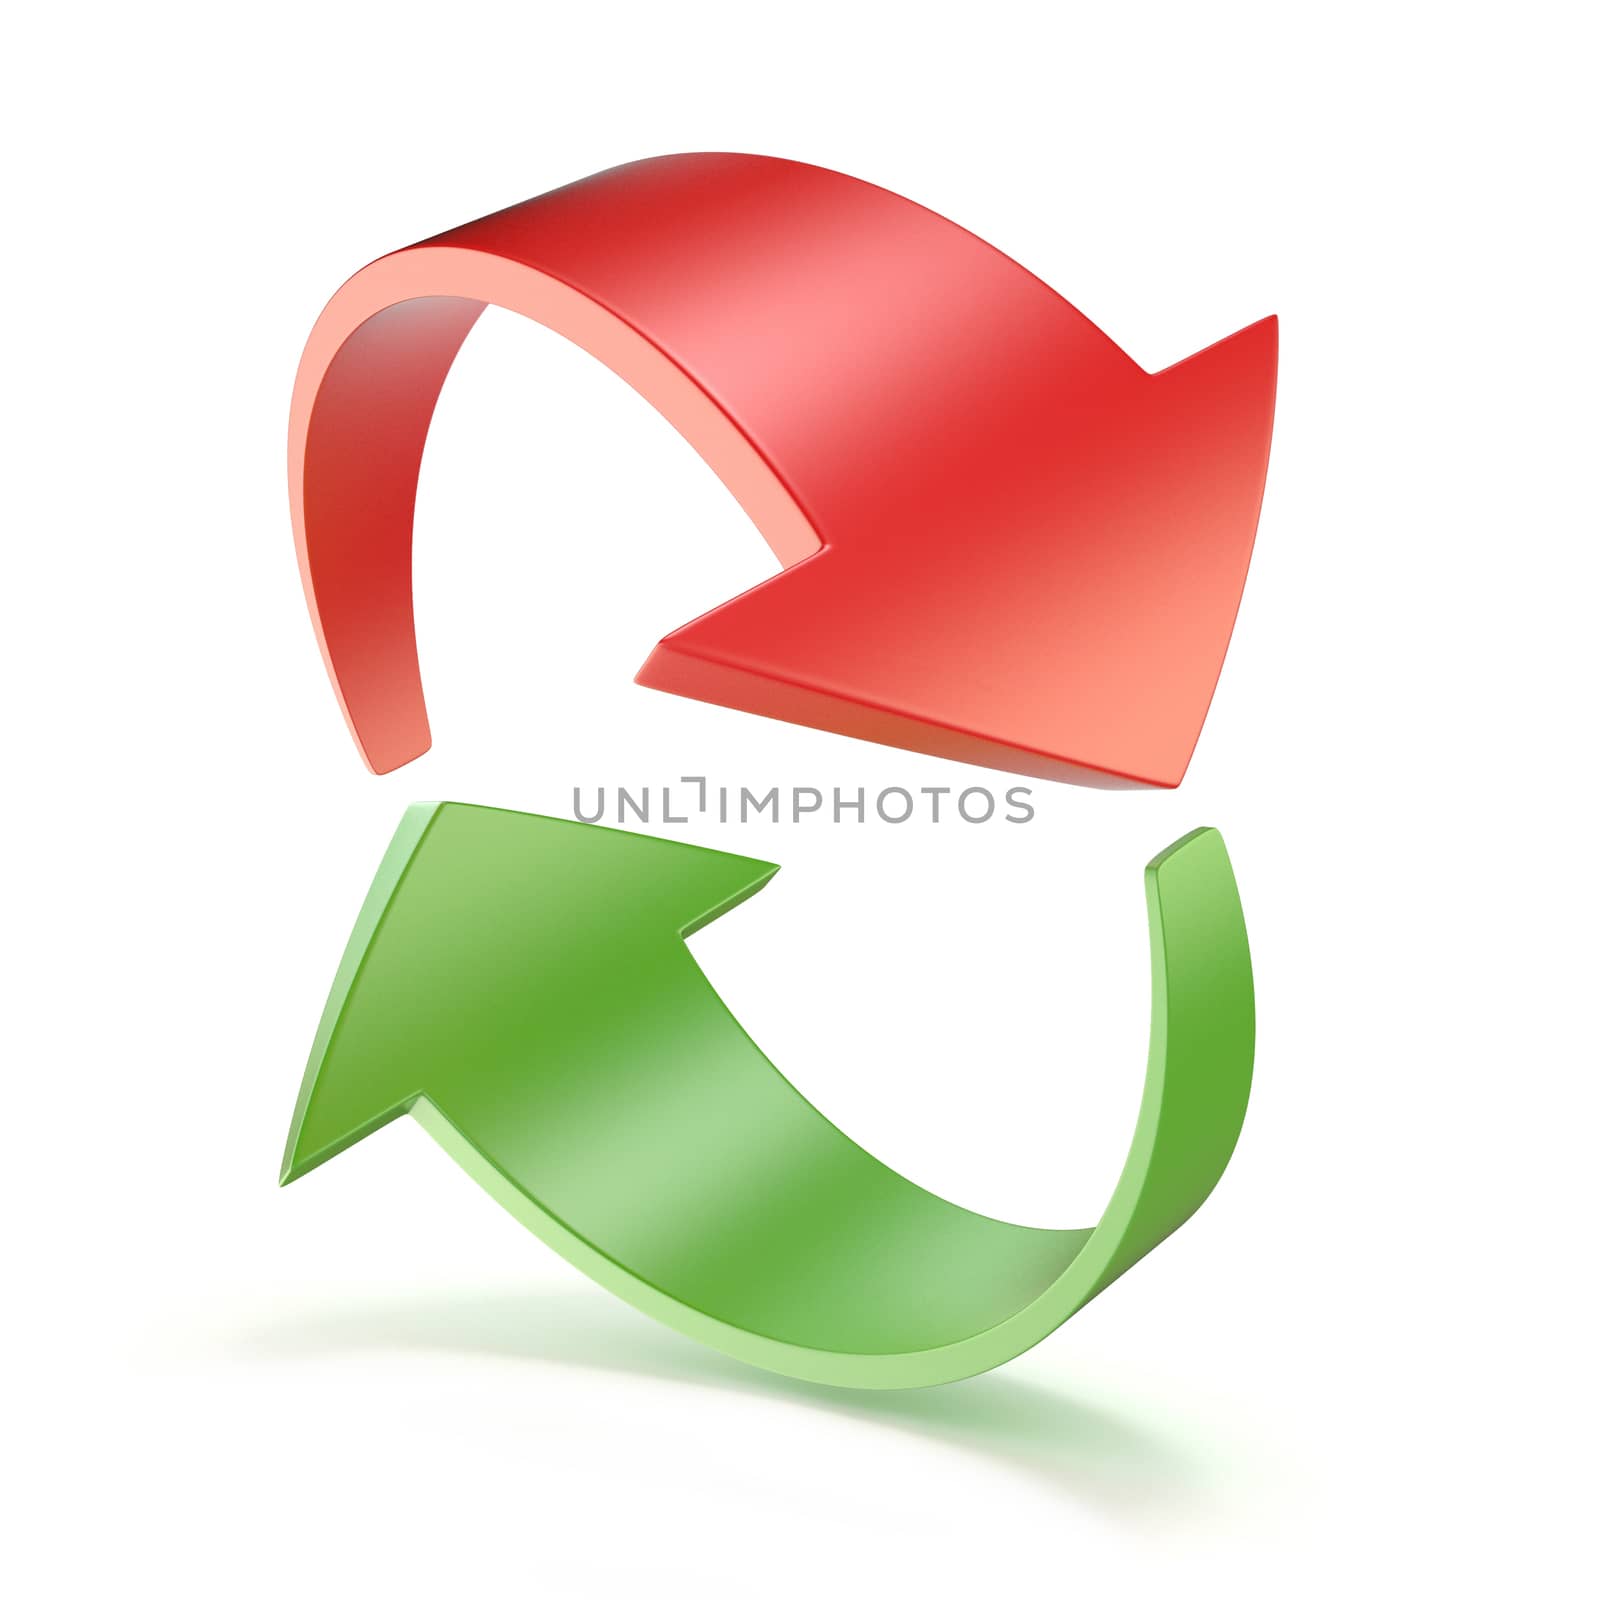 Red and green arrows circle 3D render illustration isolated on white background